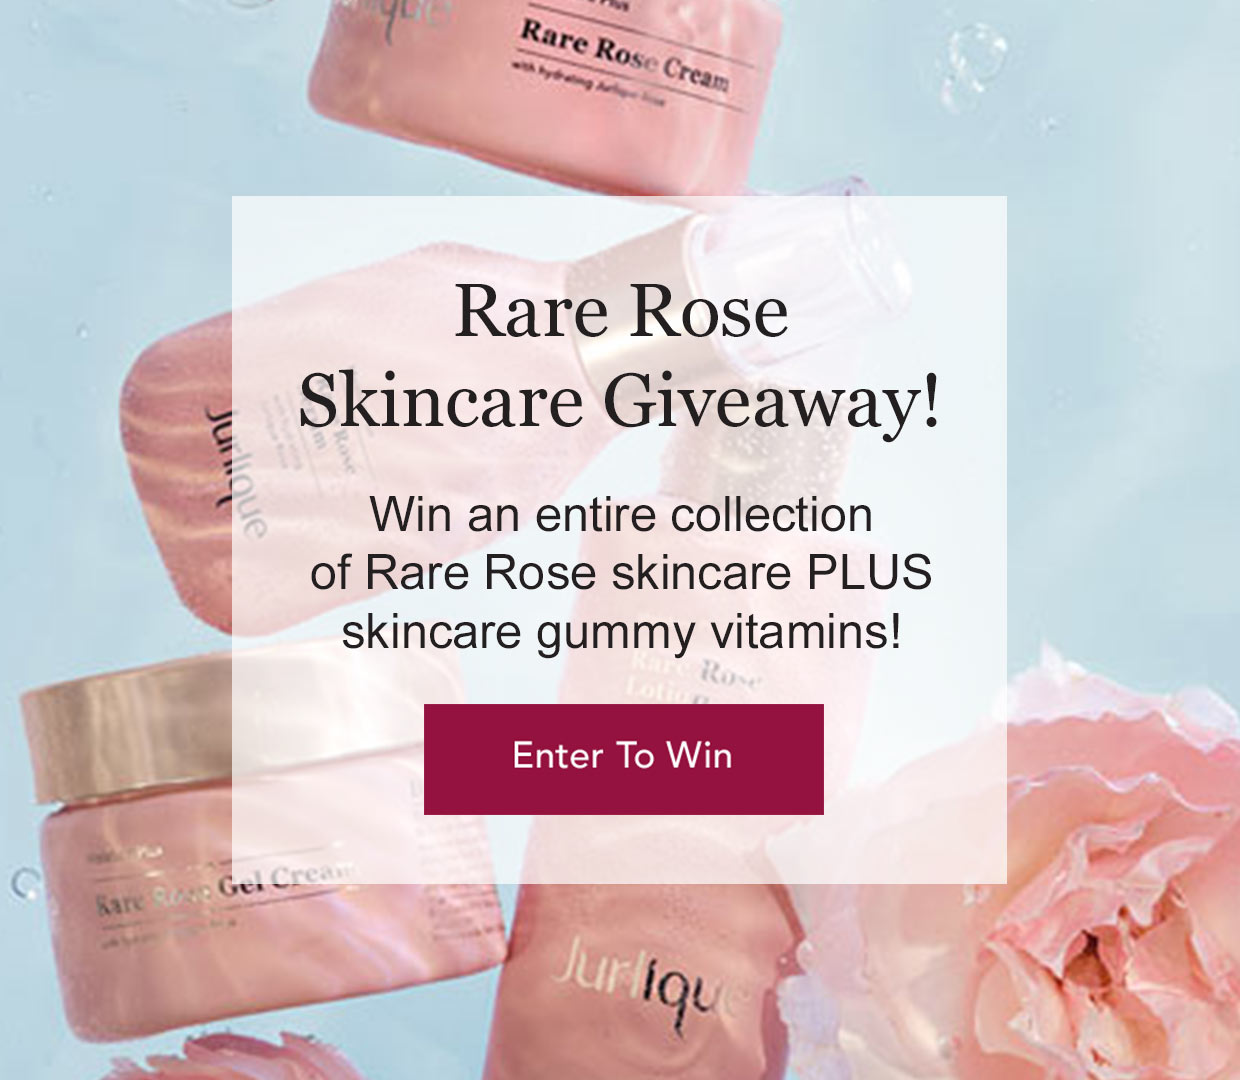 Enter the Rare Rose Skincare Giveaway! Win an entire collection of Rare Rose skincare PLUS skincare gummy vitamins. Enter now!